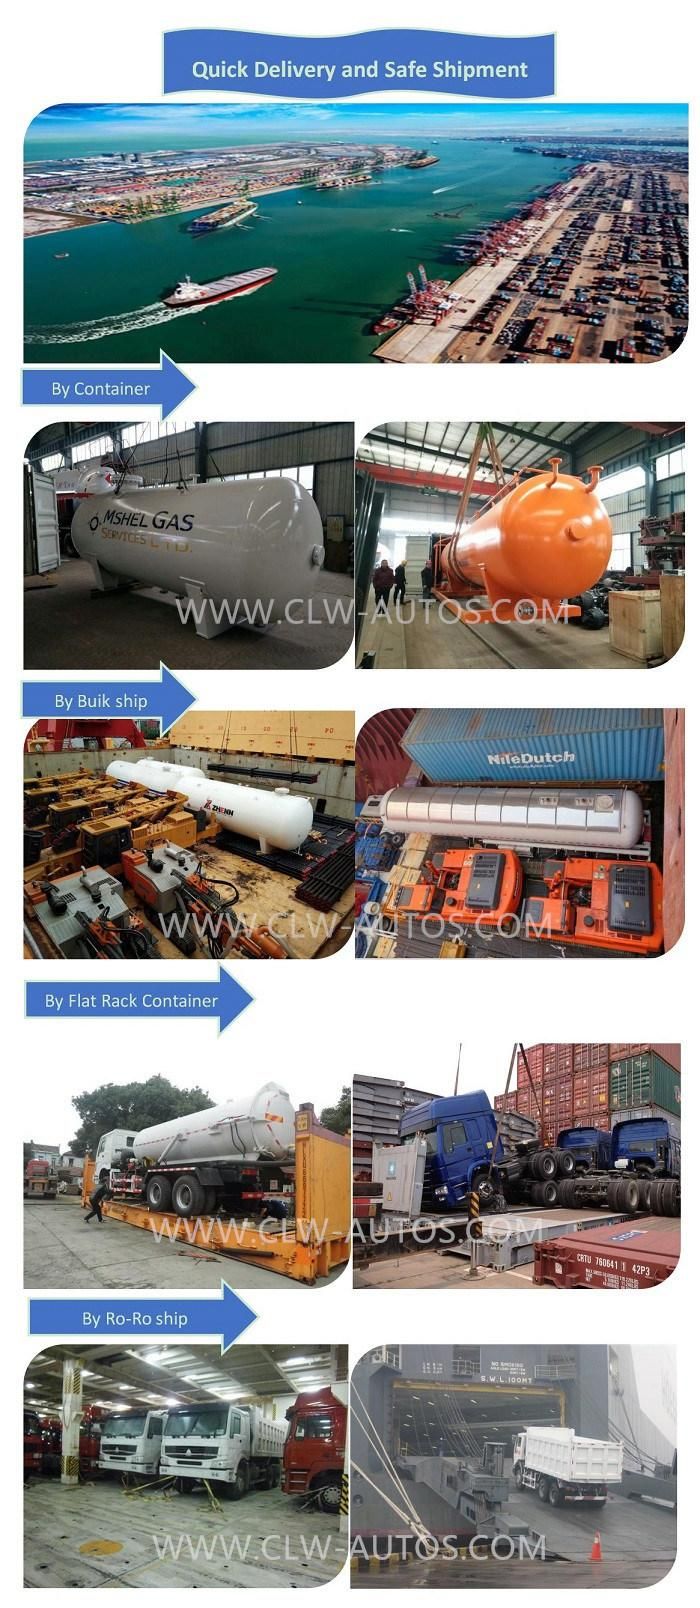 Water Tank Disinfection Truck Multi-Function Dust Suppression & Disinfection Vehicle Truck